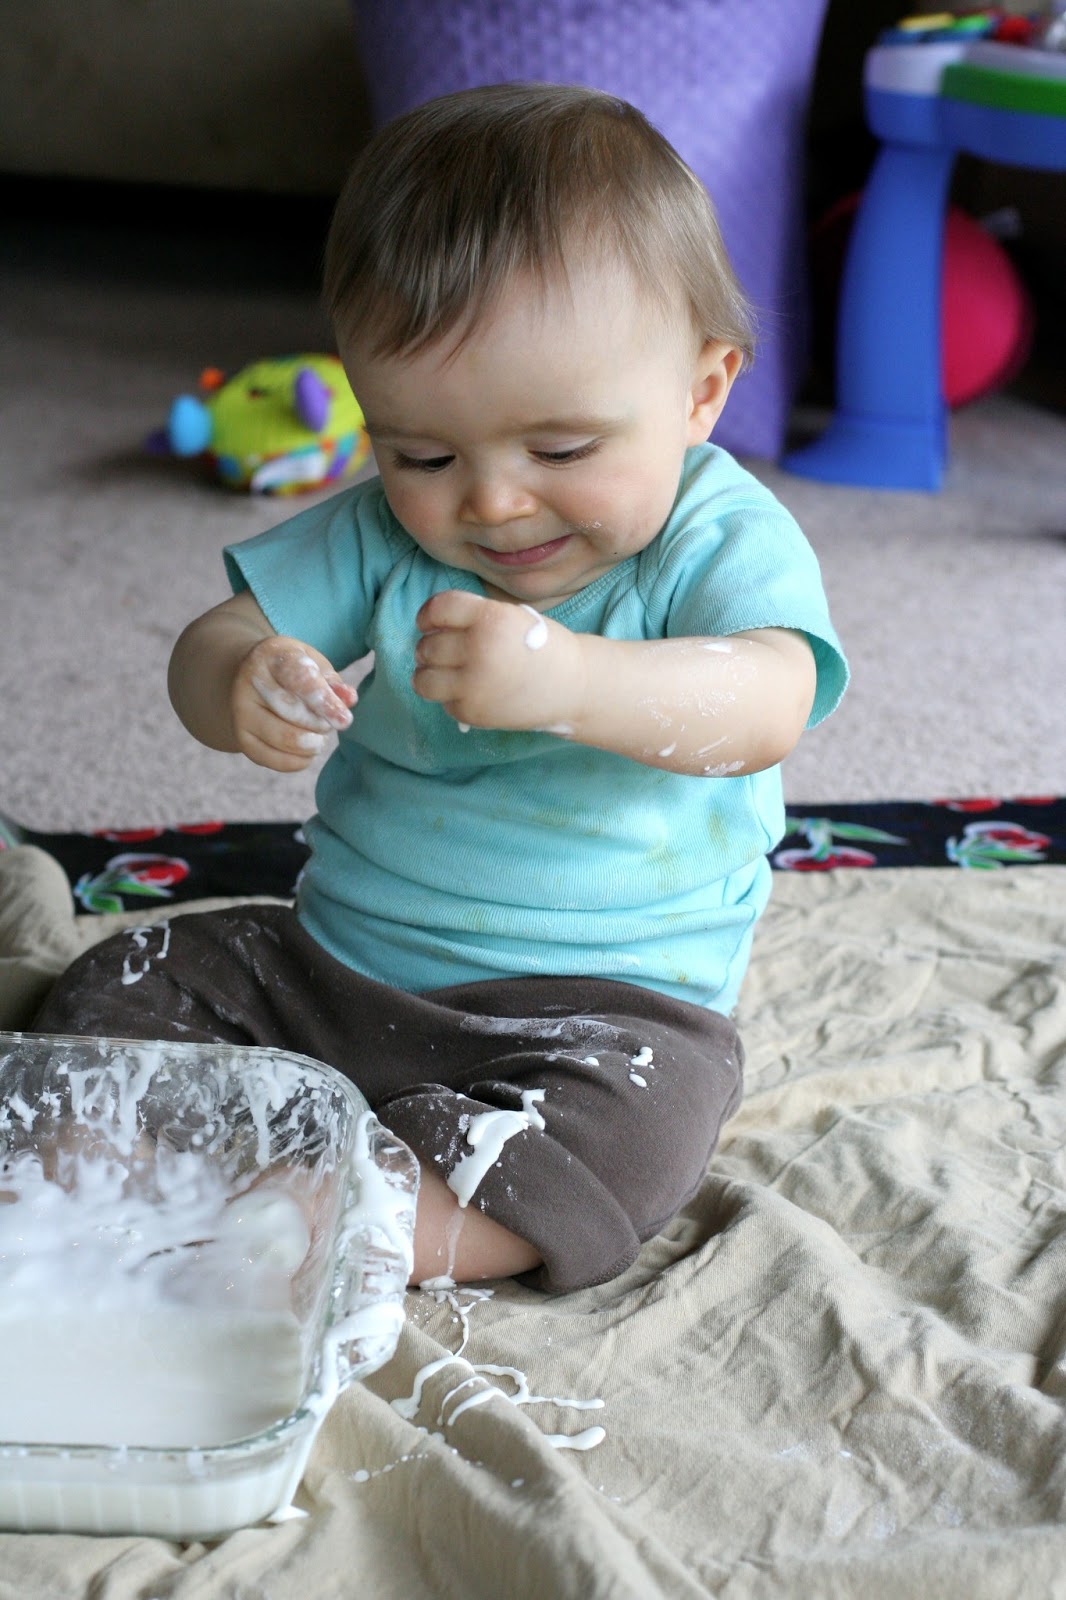 What happens when you mix cornstarch and water?